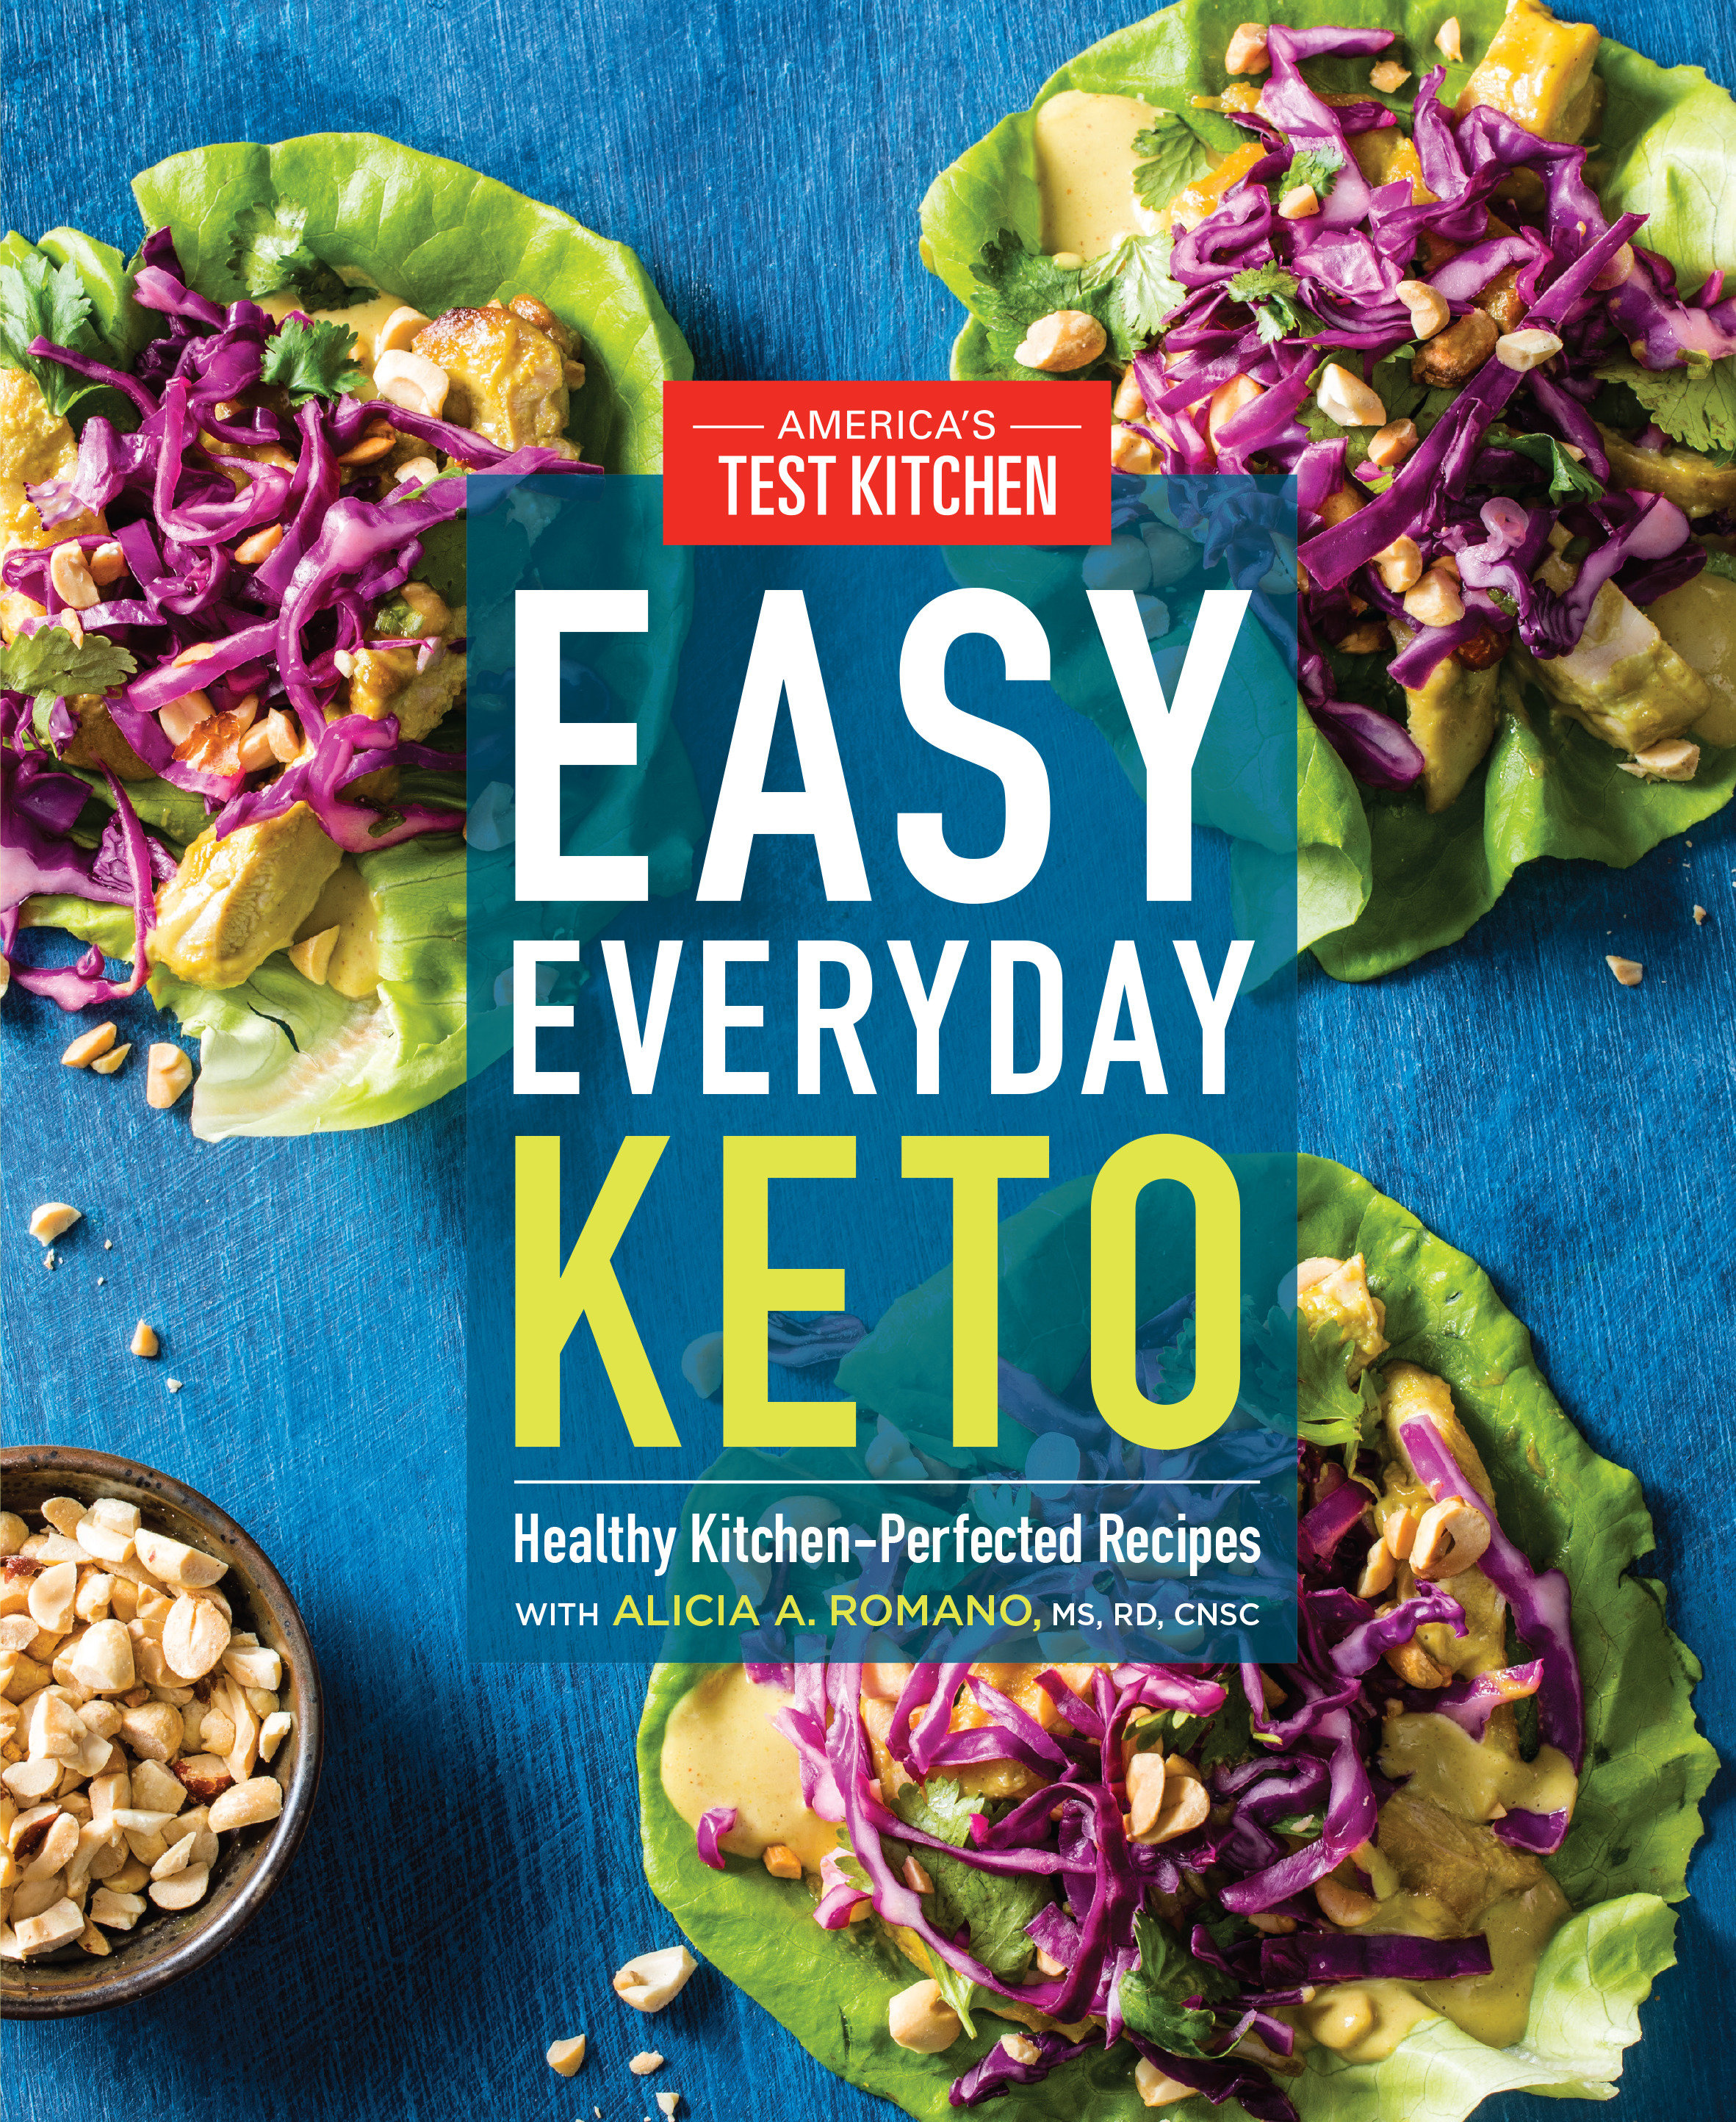 Easy Everyday Keto Healthy Kitchen-Perfected Recipes cover image